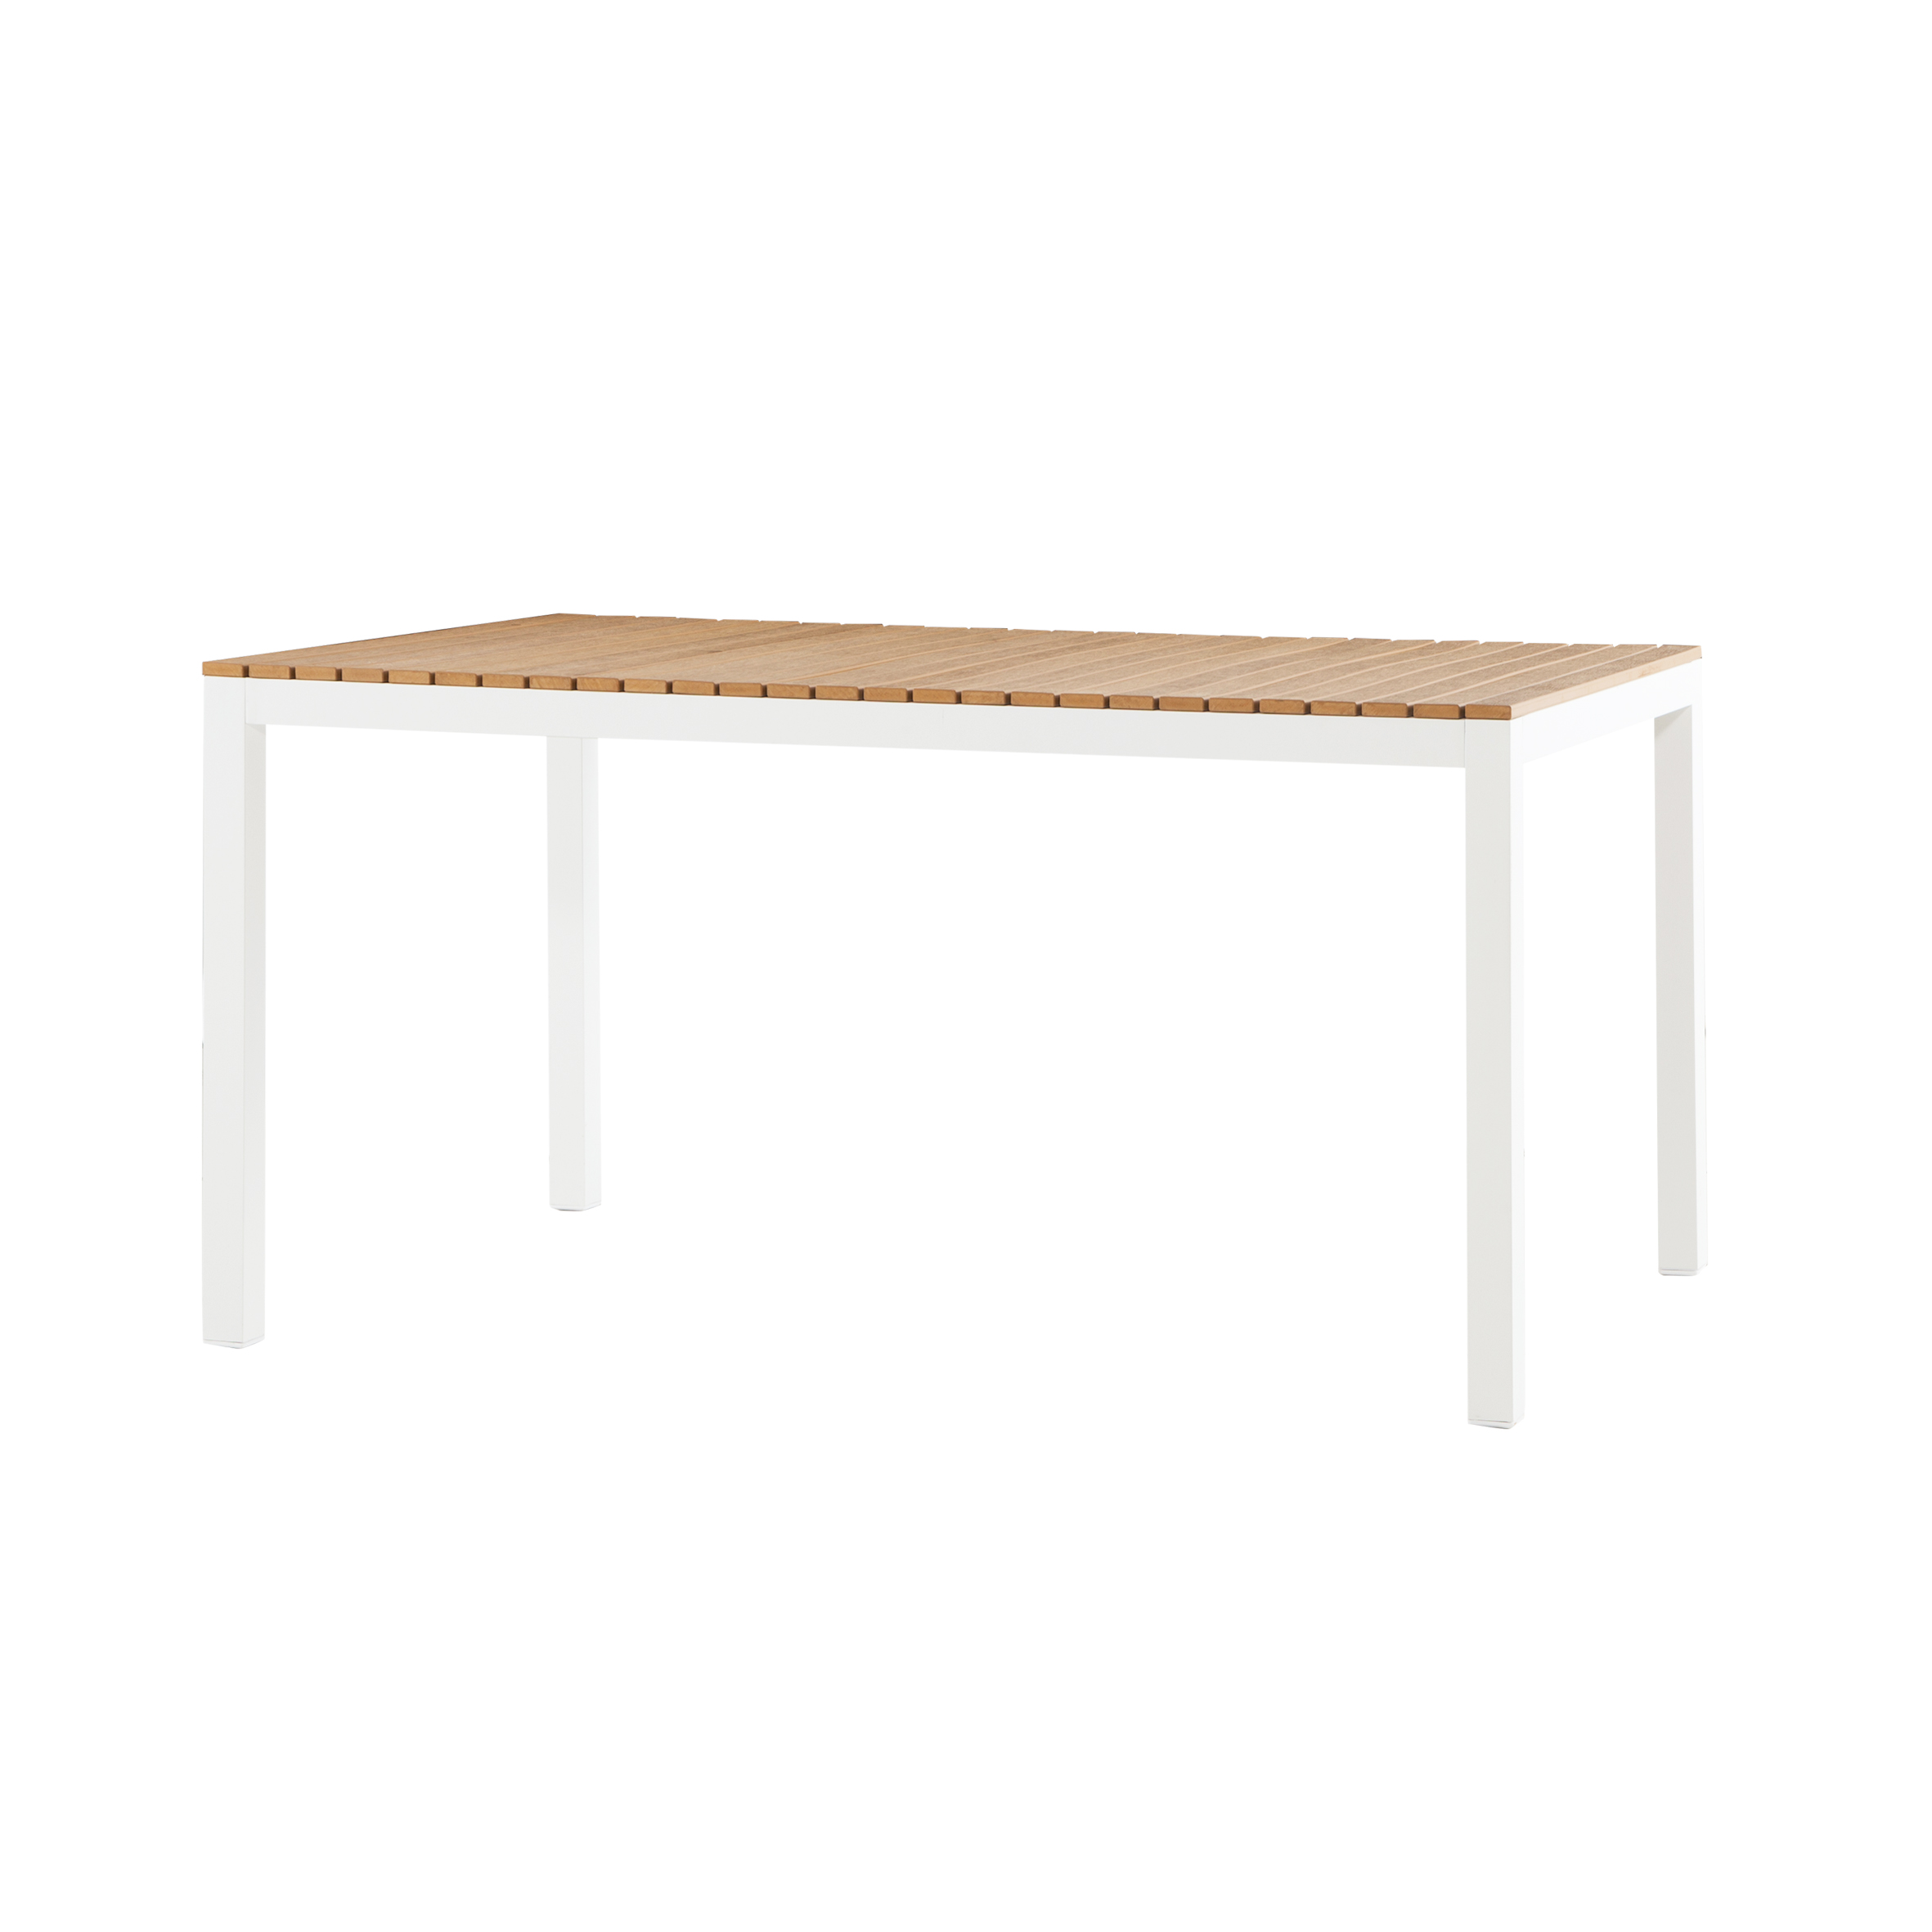 Snow white dining table (Poly wood) S1